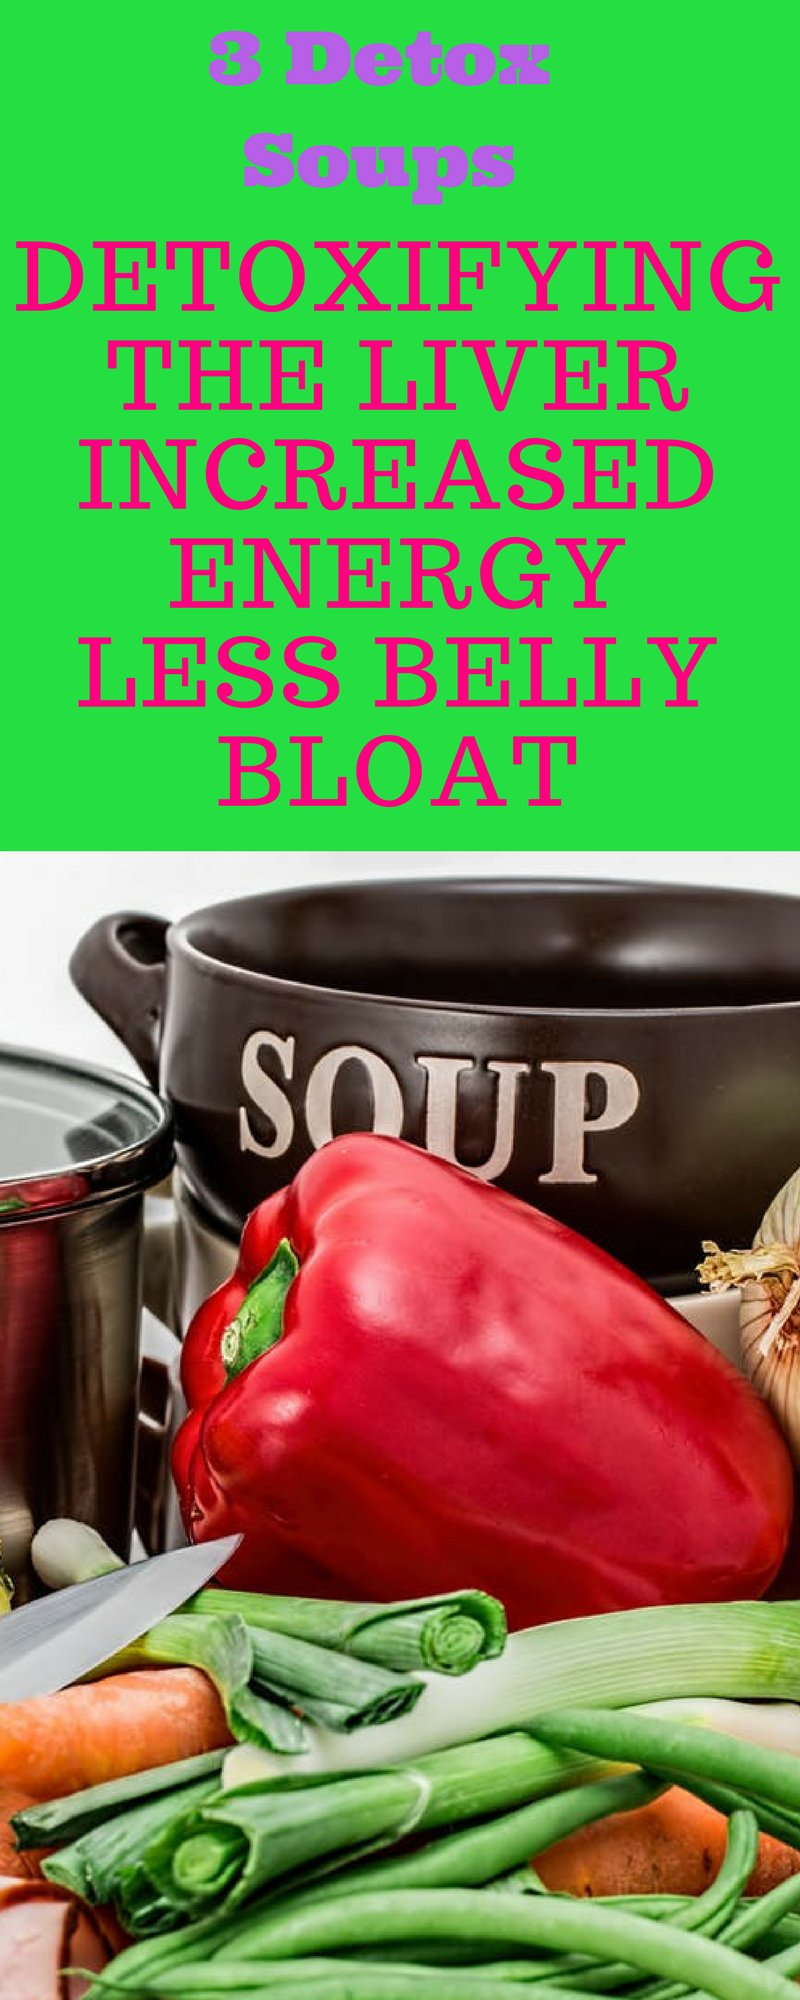 Cleanse your liver with detox soup. Lose belly bloat, lose weight and feel full longer. Your weight loss goals need healthy soups at lunch or dinner.